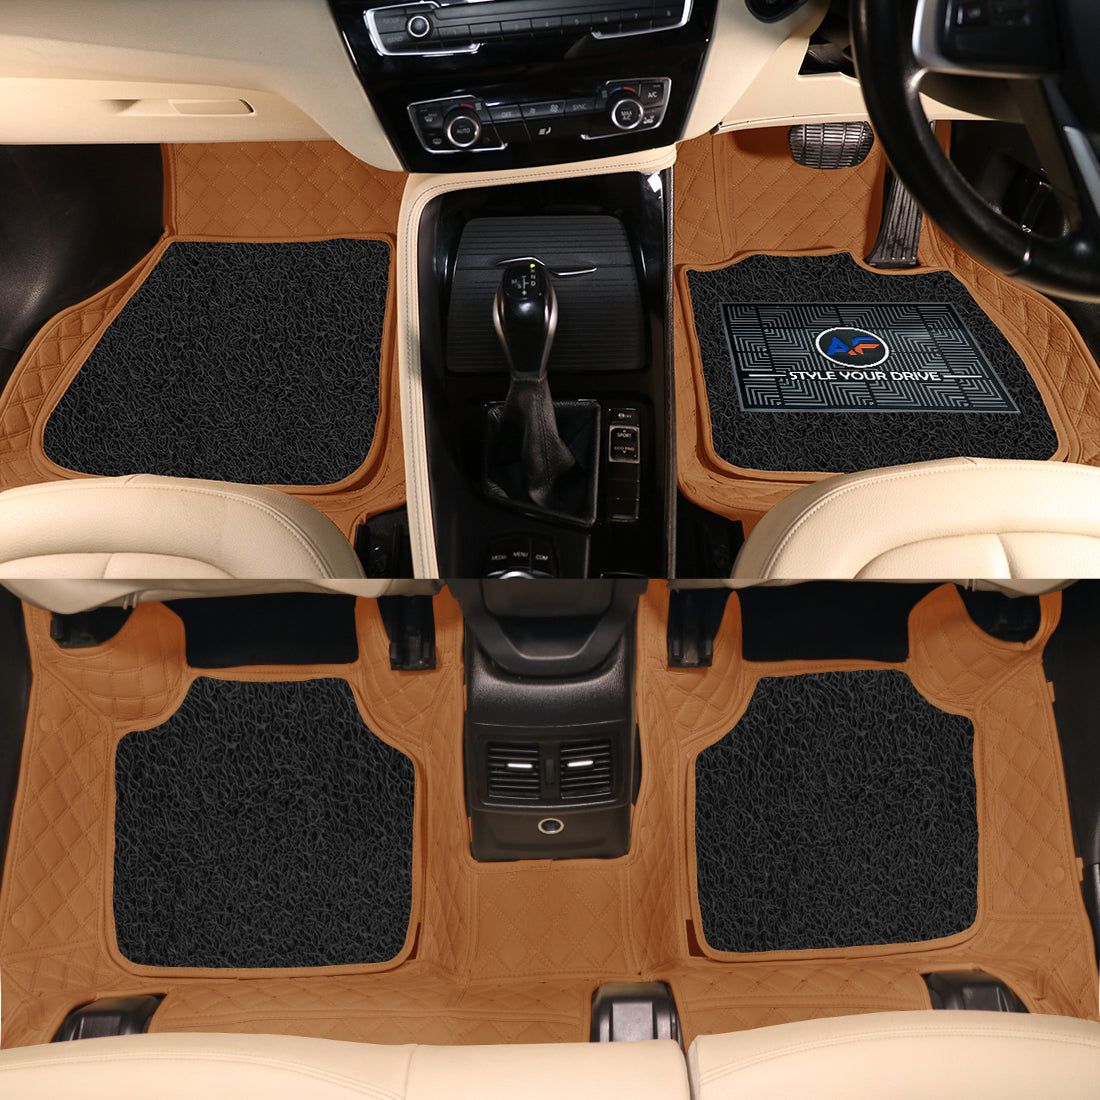 MG Gloster (6 Seater) 2020 7D Luxury Car Mat, All Weather Proof, Anti-Skid, 100% Waterproof & Odorless with Unique Diamond Fish Design (24mm Luxury PU Leather, 2 Rows)